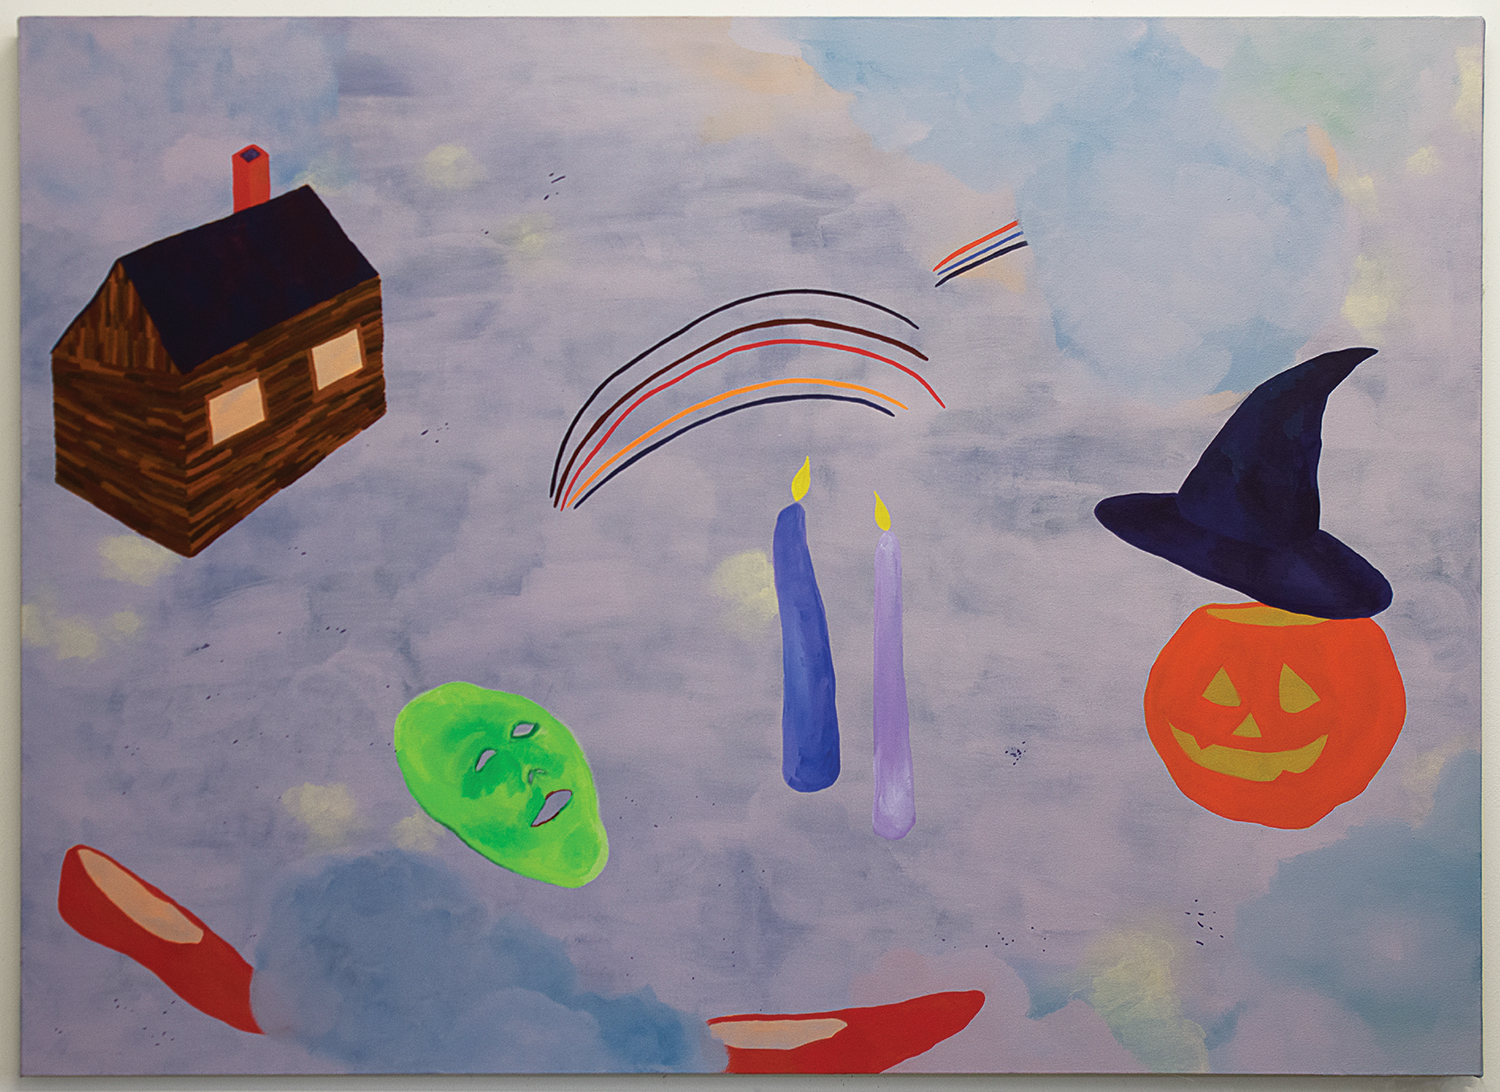 Harley Lafarrah Eaves, More Thematic Plot Points In The Wizard Of Oz From Childhood Memories, 2018. Image courtesy of projects+gallery